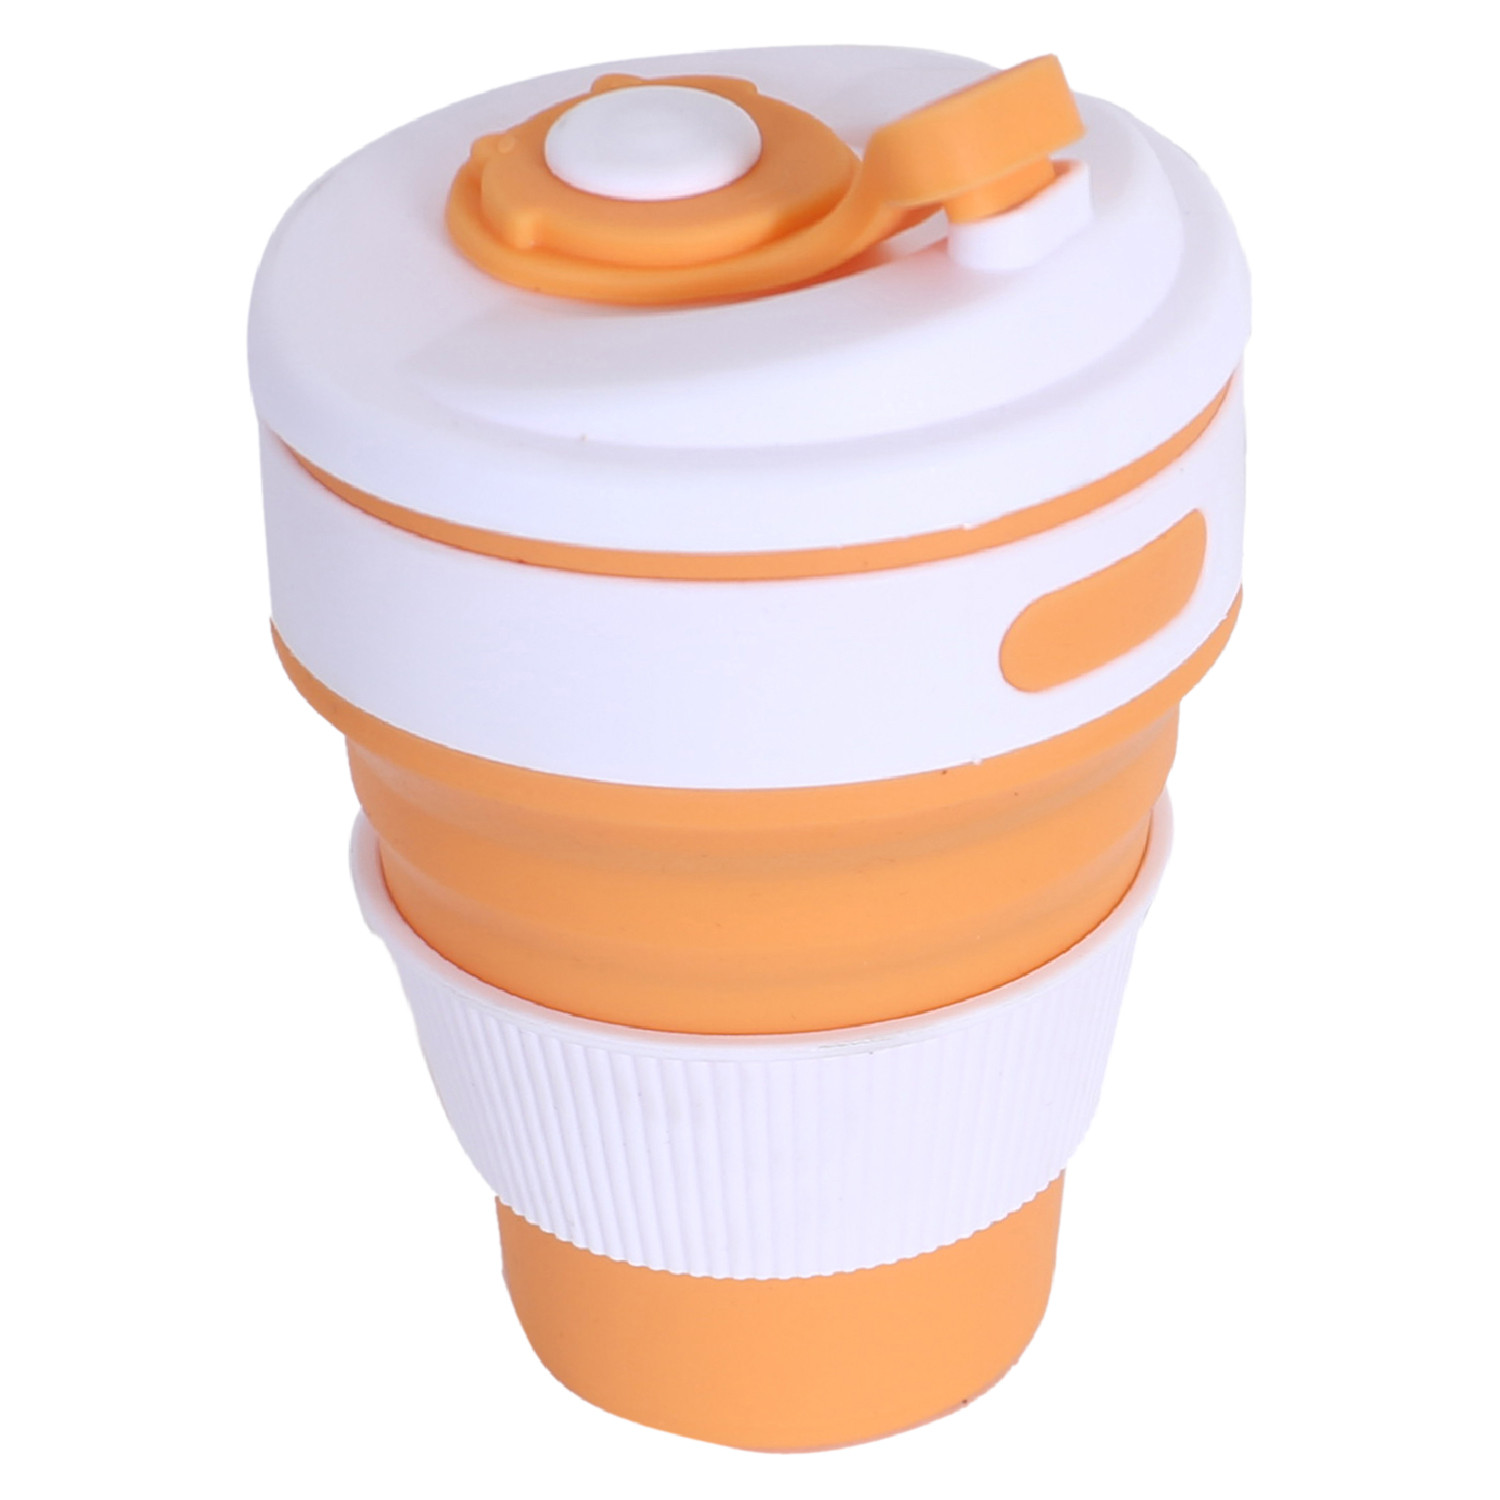 Kuber Industries Collapsible Coffee Cup|Silicone Portable Travel Coffee Mug|Camping Cup with Lid for Travel,Hiking Outdoors,350 ML,(Orange)